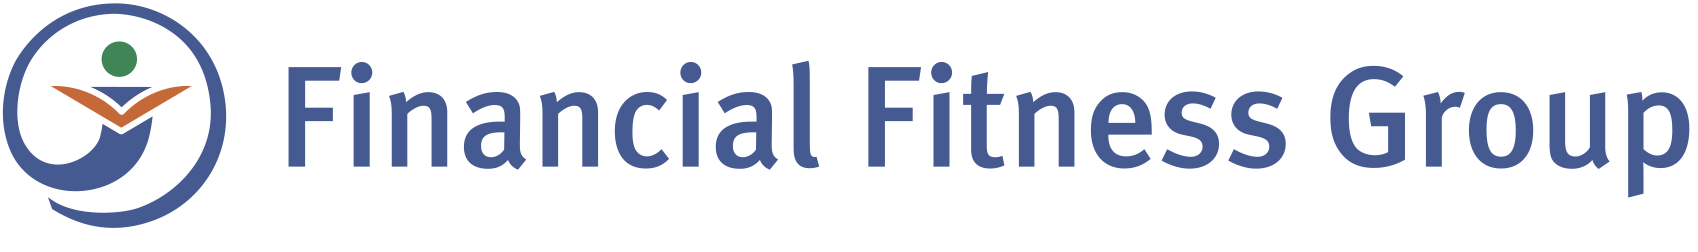 Financial Fitness Group